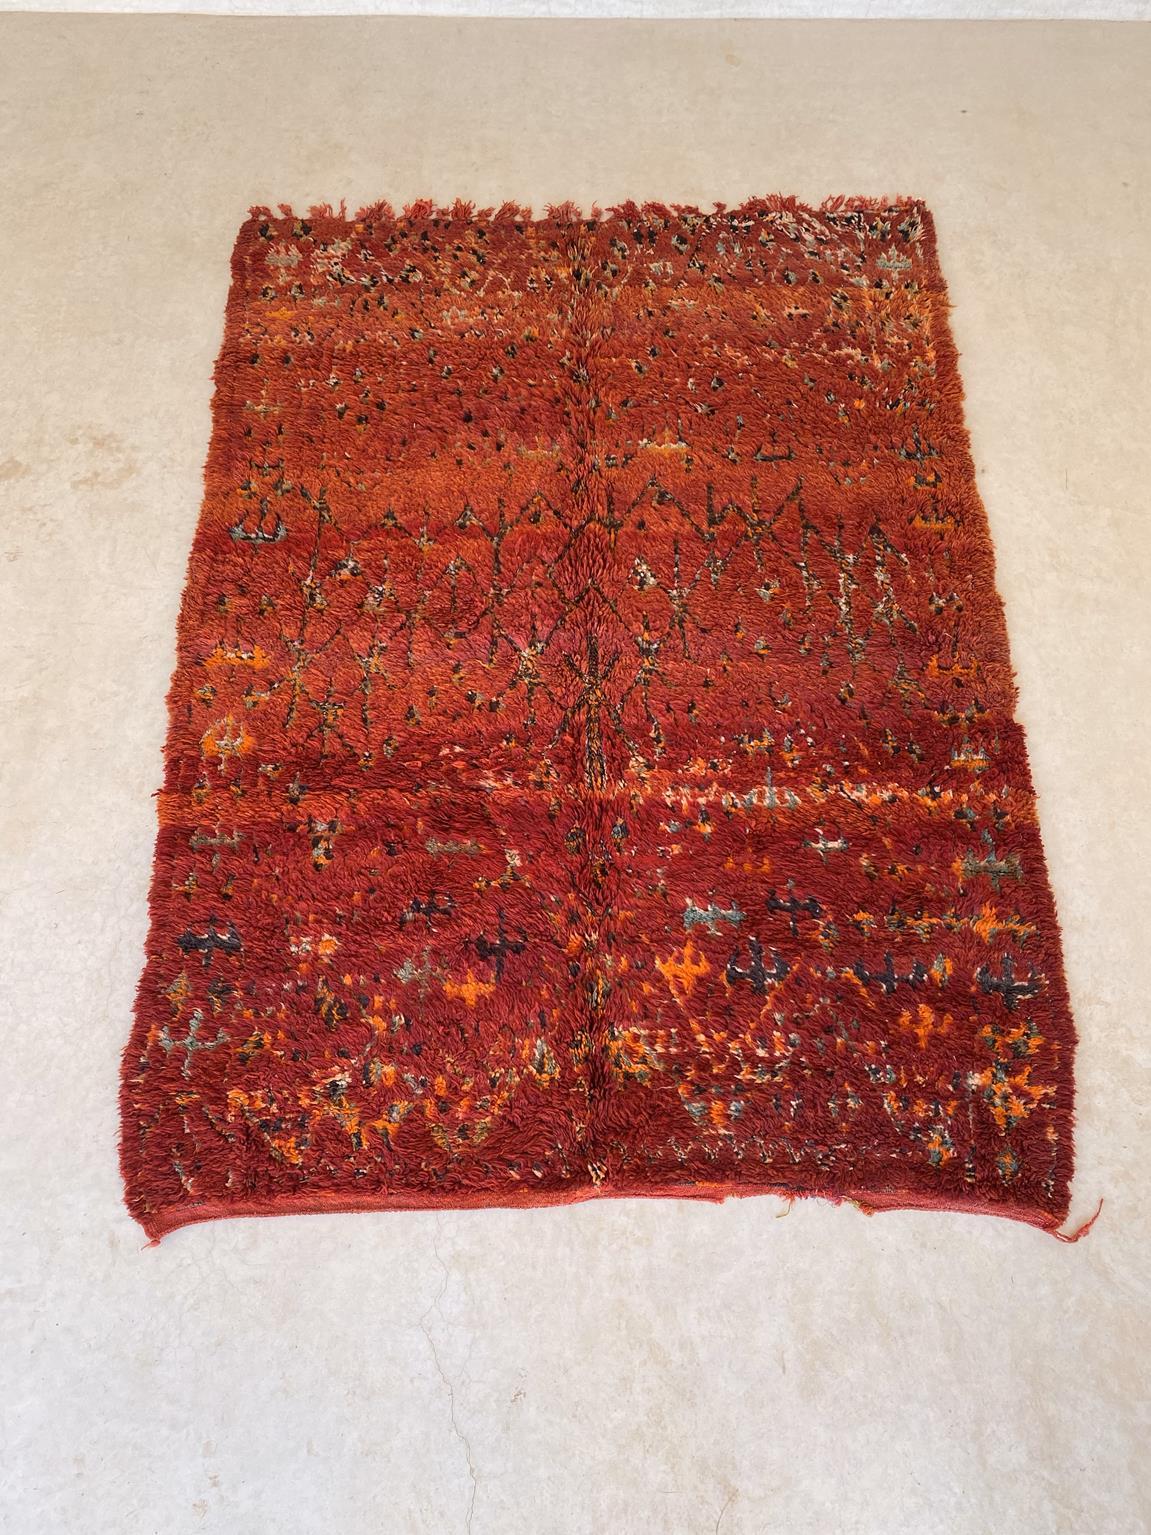 This vintage Zayane rug is just gorgeous! The perfect bohemian rug to bring warmth and character to your space!

The background color of this rug is a deep red but I guess you can tell from the pictures attached that it shows different shades